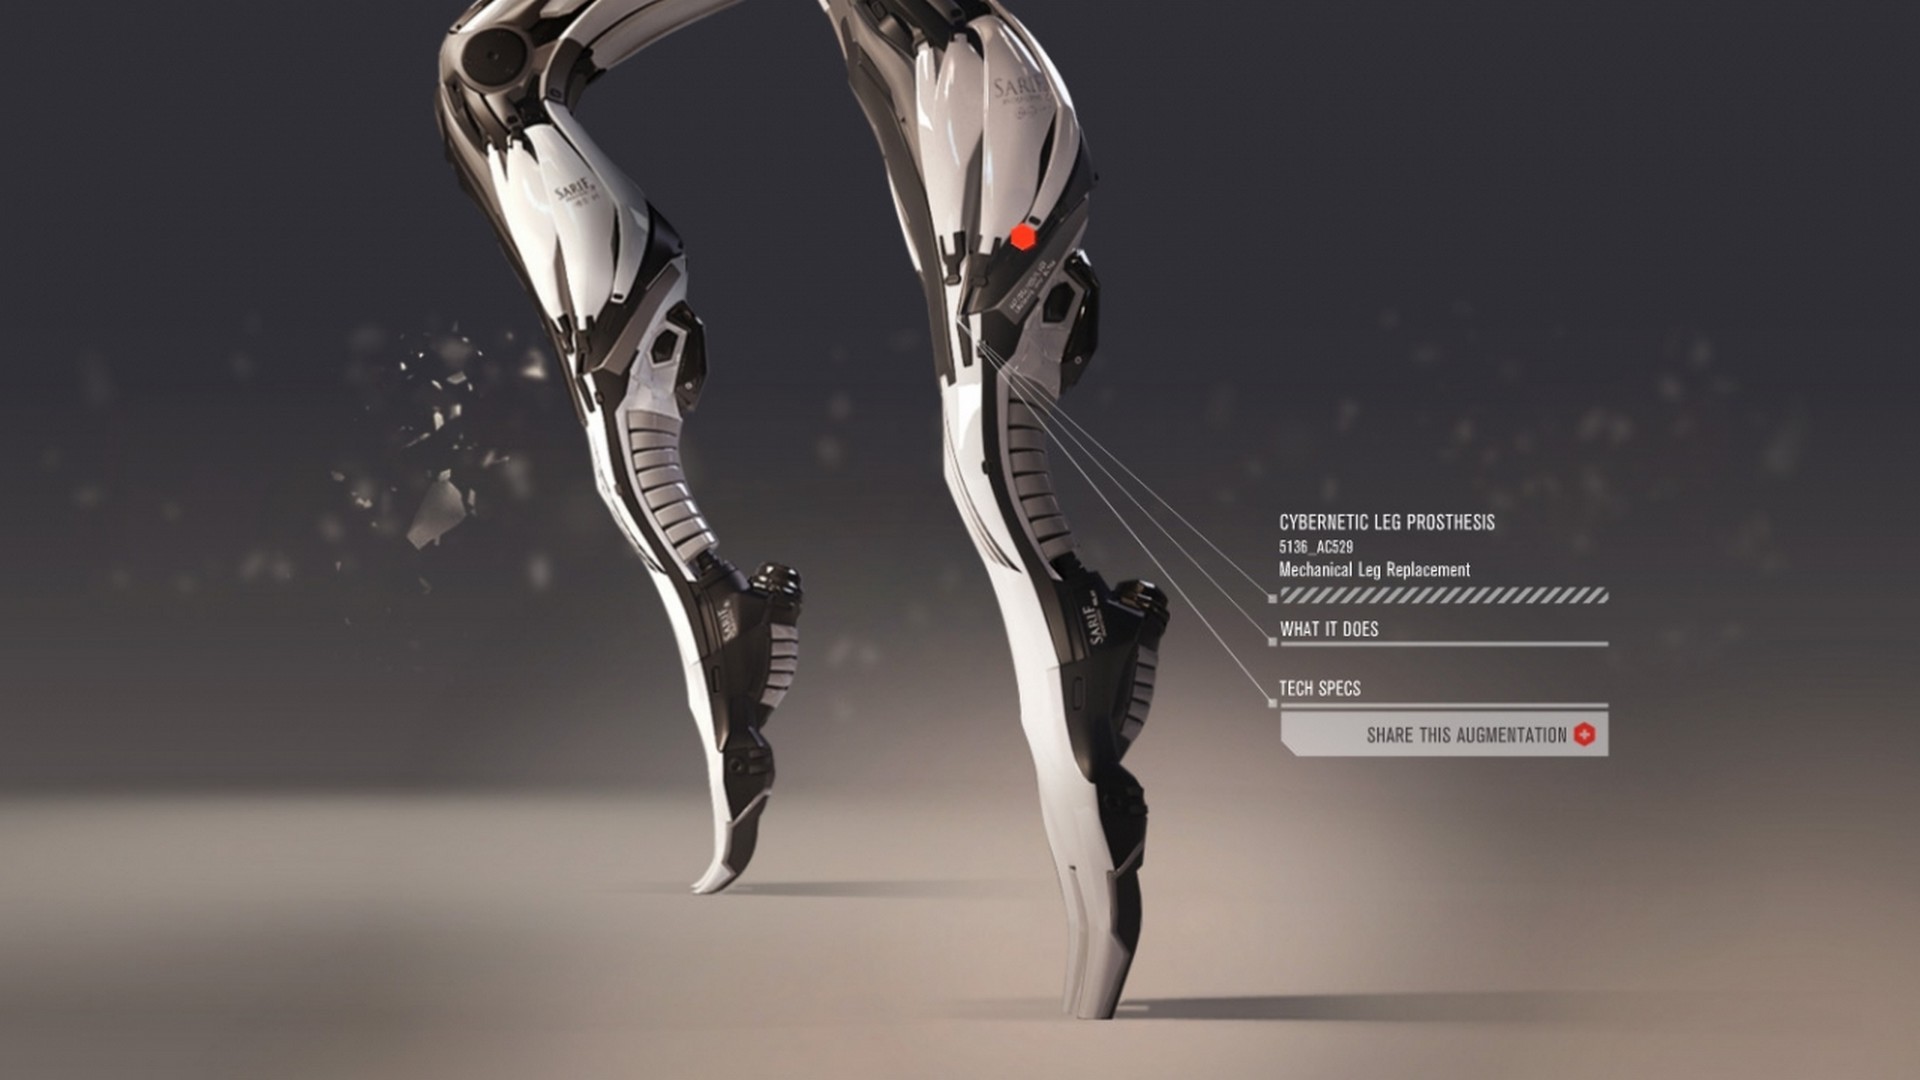 Human Augmentation is already here and the future of what is possible